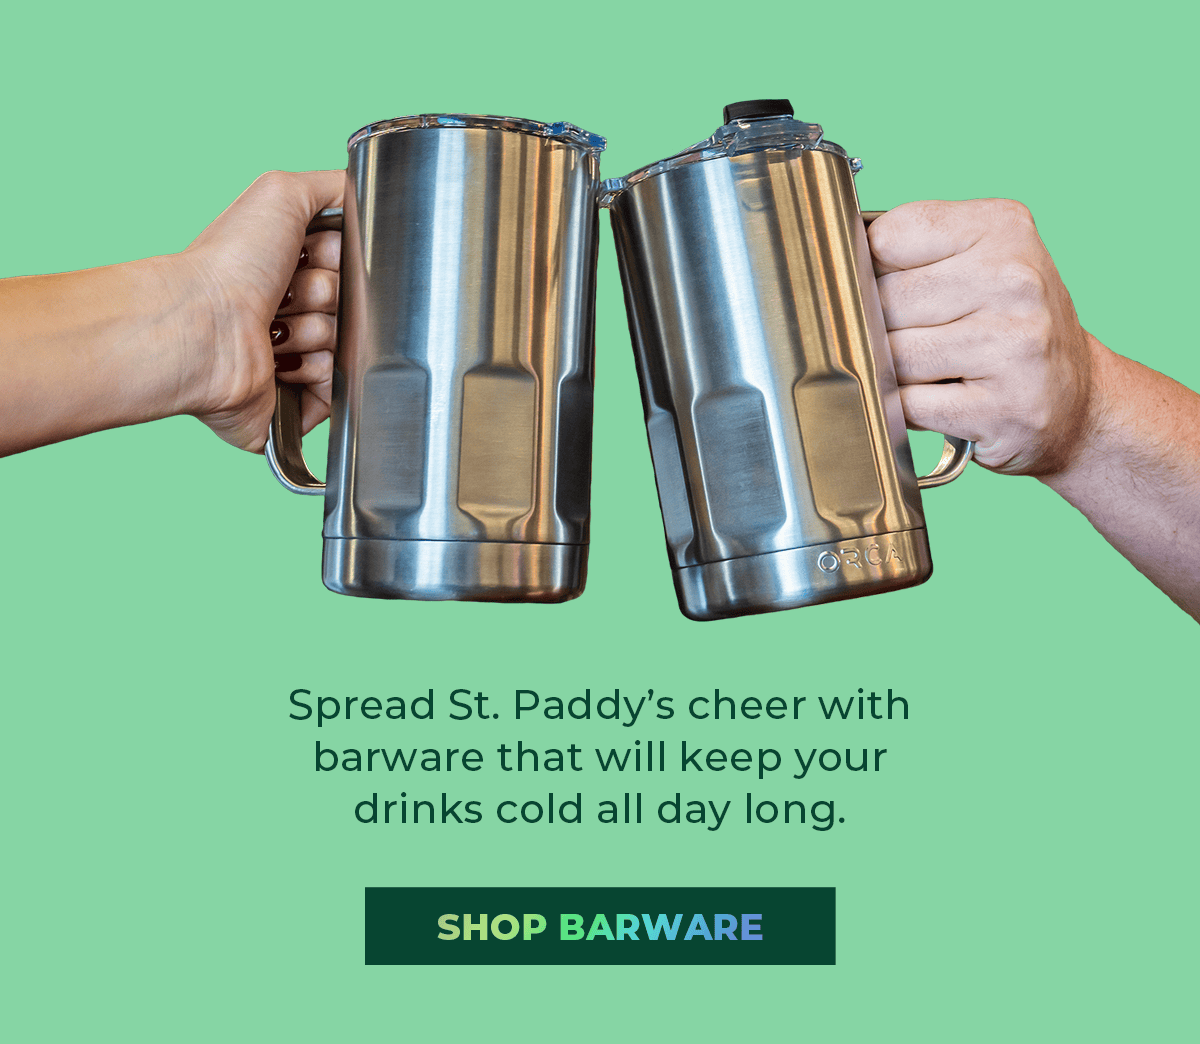 Image of two Stein's cheering with text reading "shop barware"